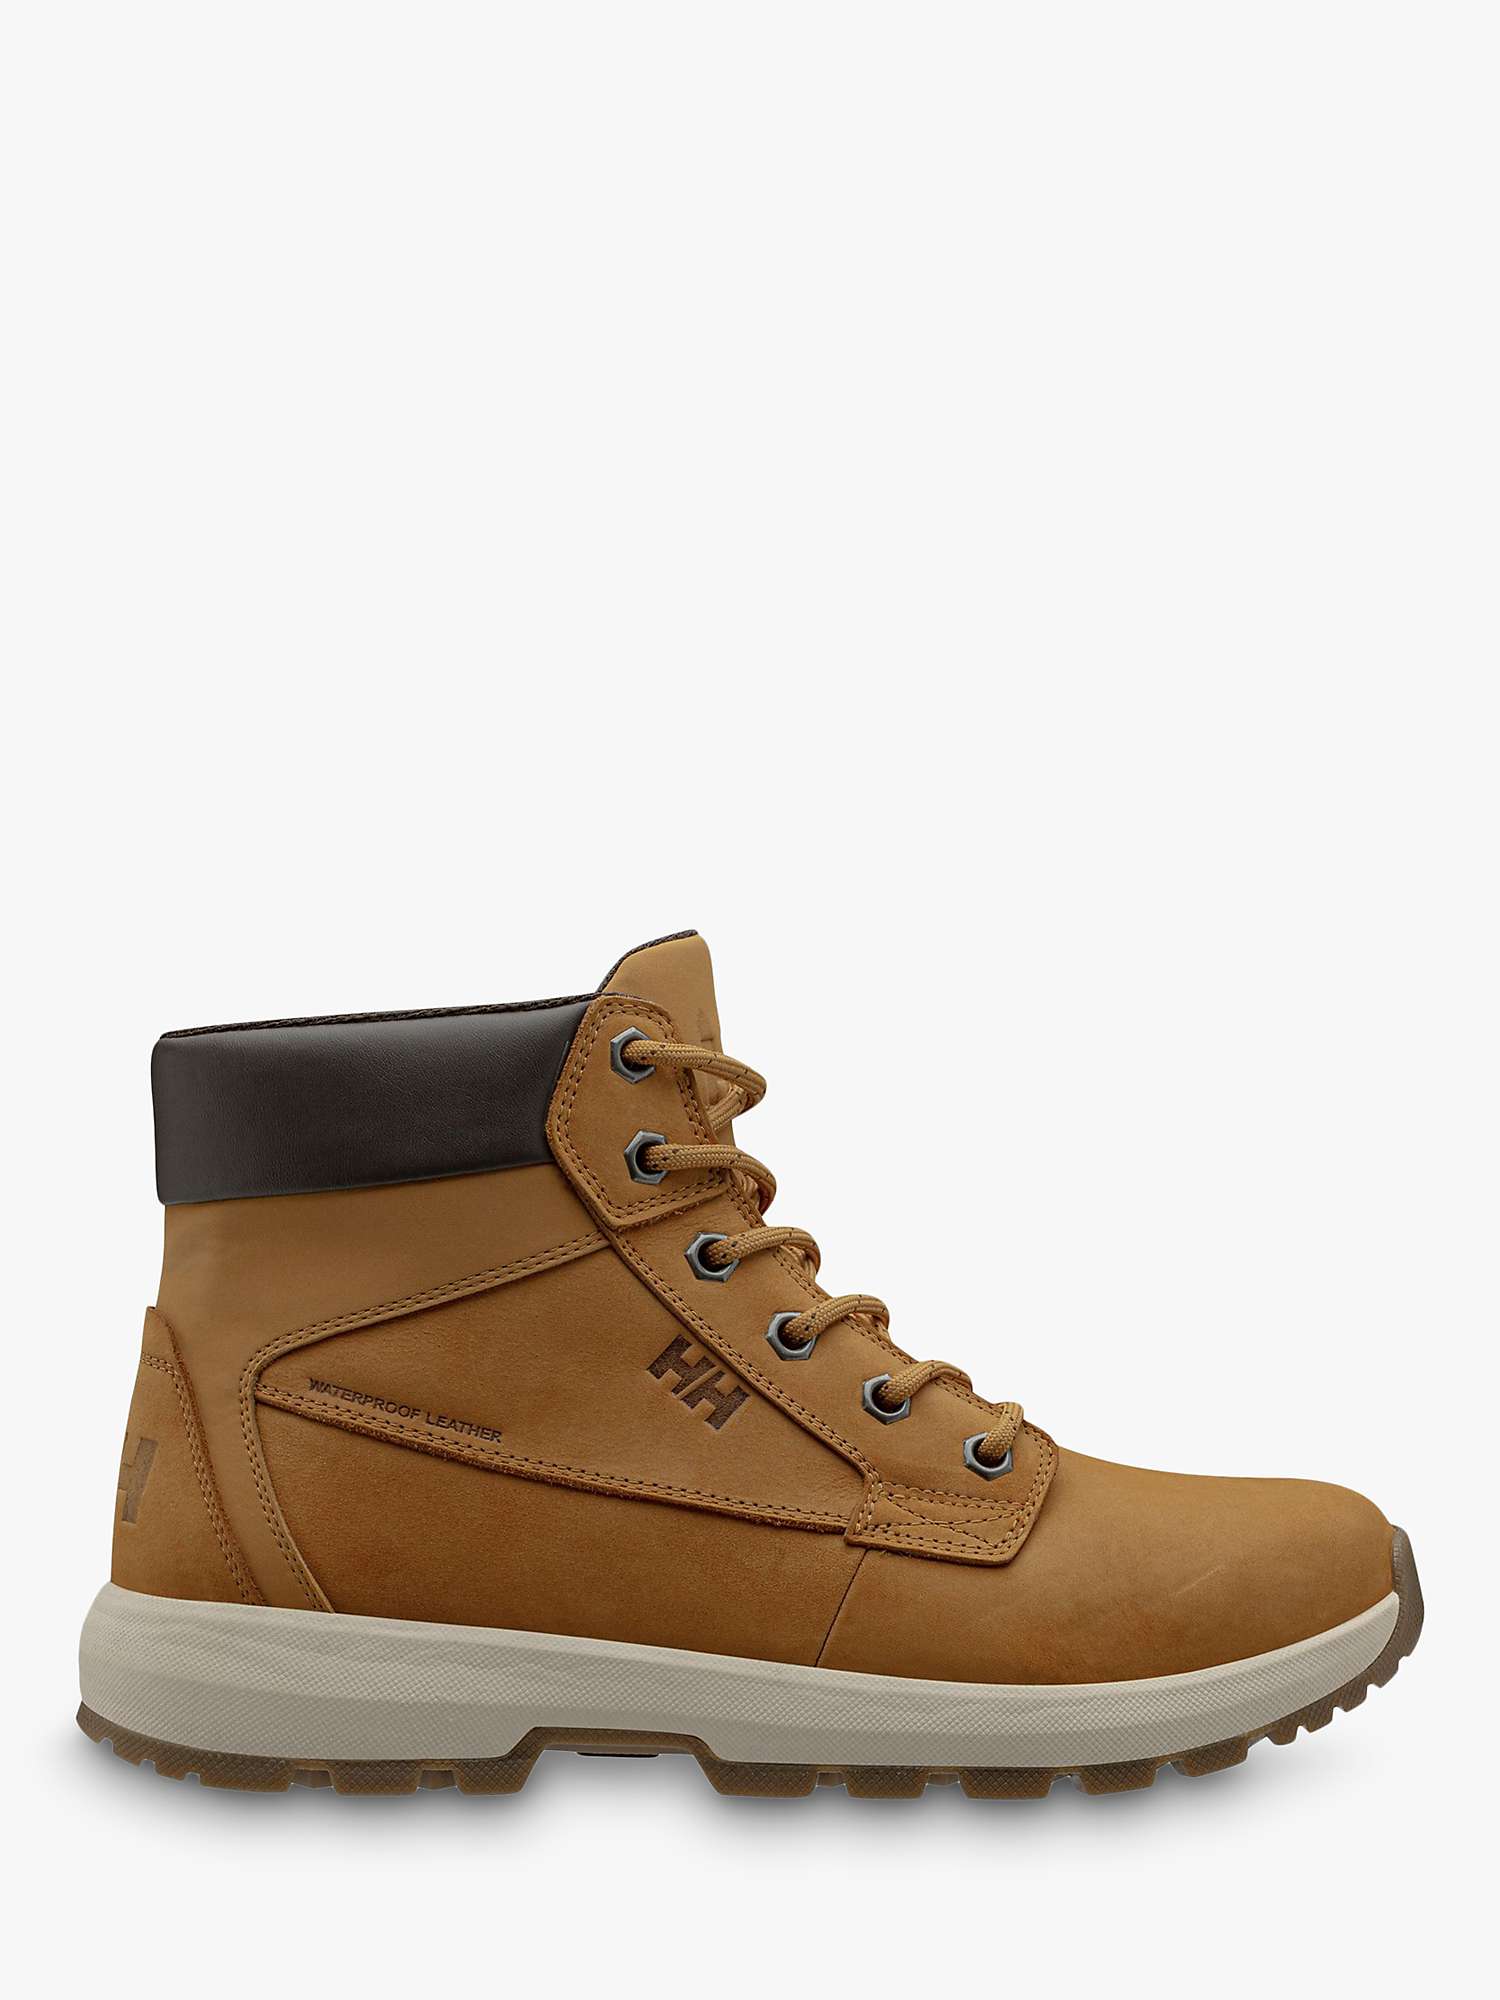 Buy Helly Hansen Bowstring Leather Waterproof Ankle Boots, Honey Online at johnlewis.com